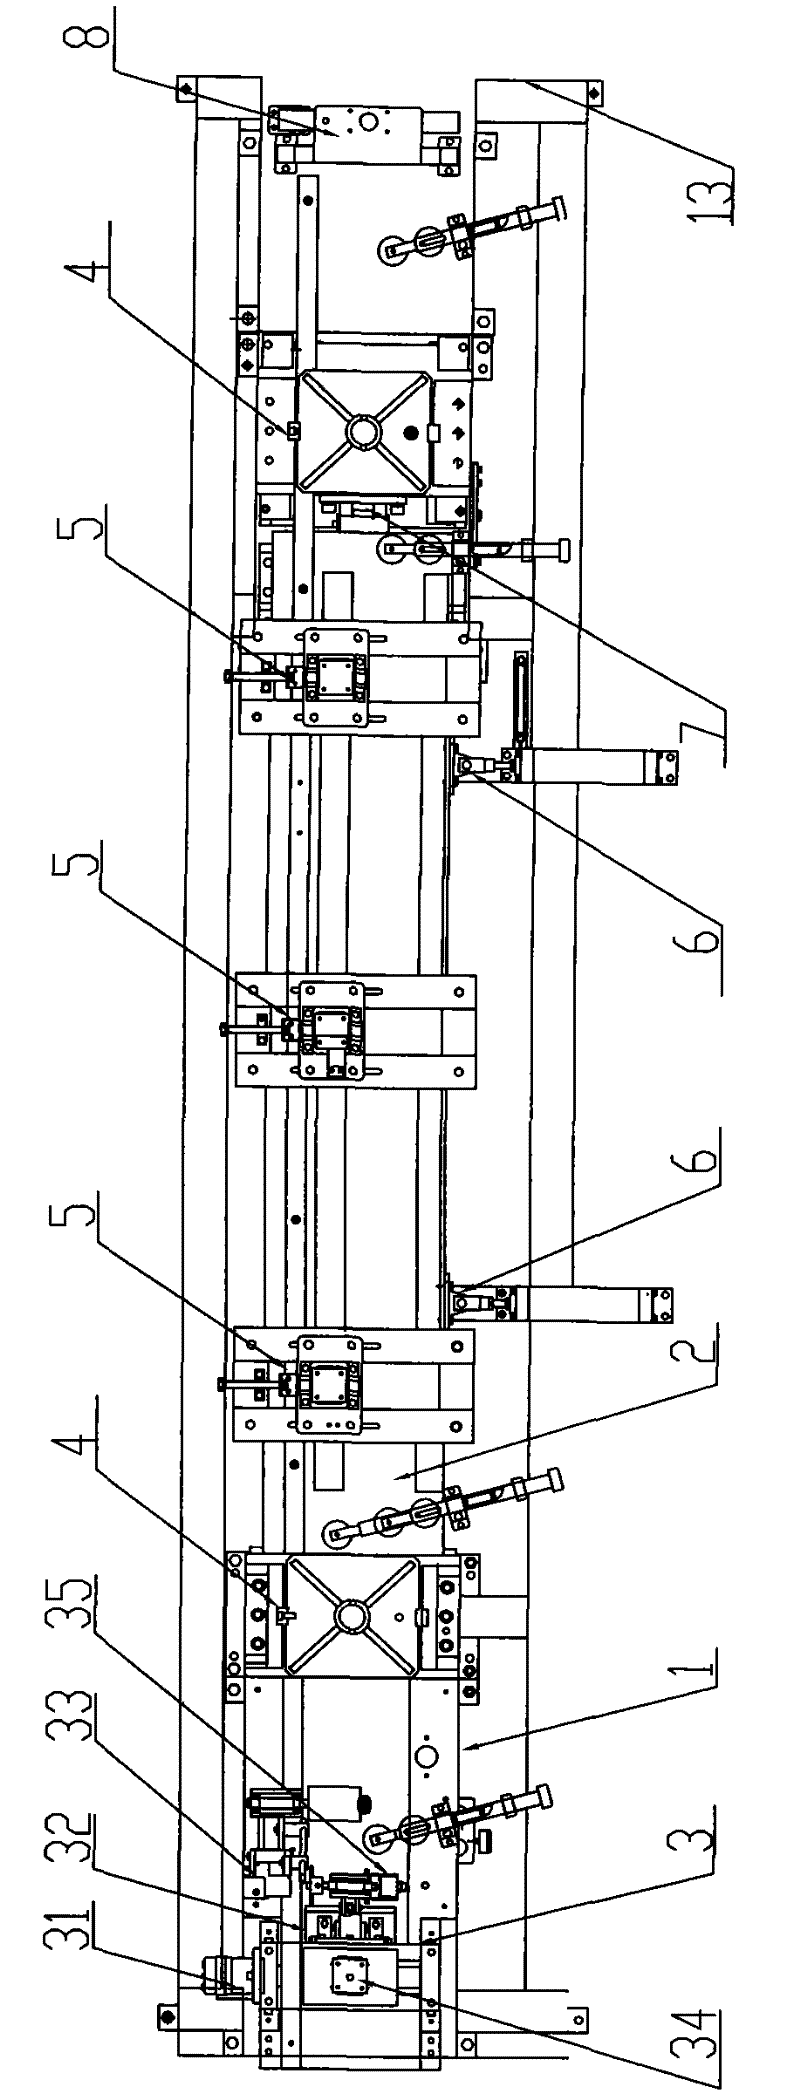 Full-automatic infinitely-long finger jointing machine